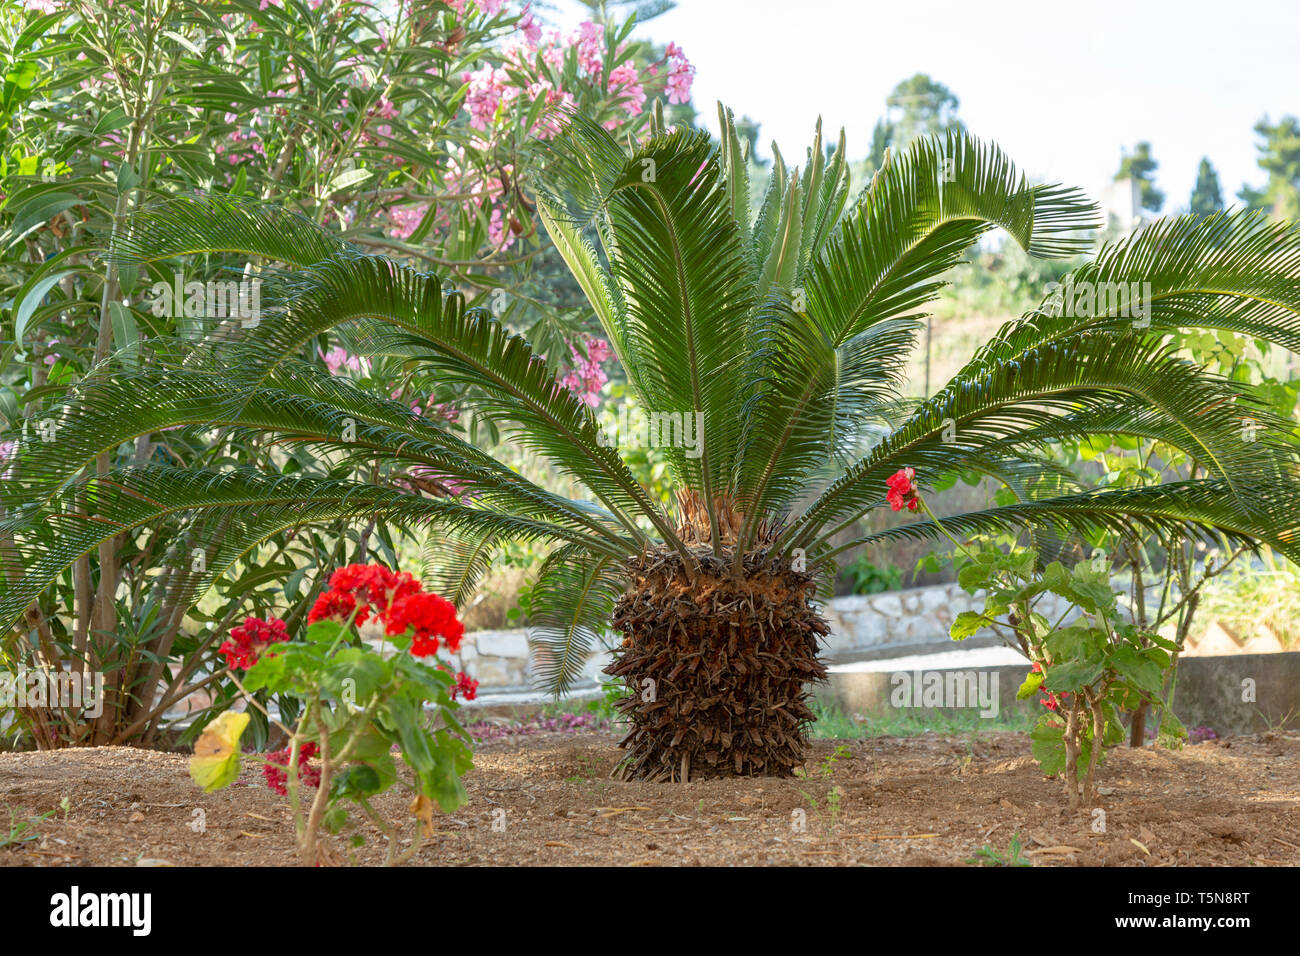 Small palm tree and flawers in a exotic garden, popular plants for decorating and creating exotic gardens Stock Photo